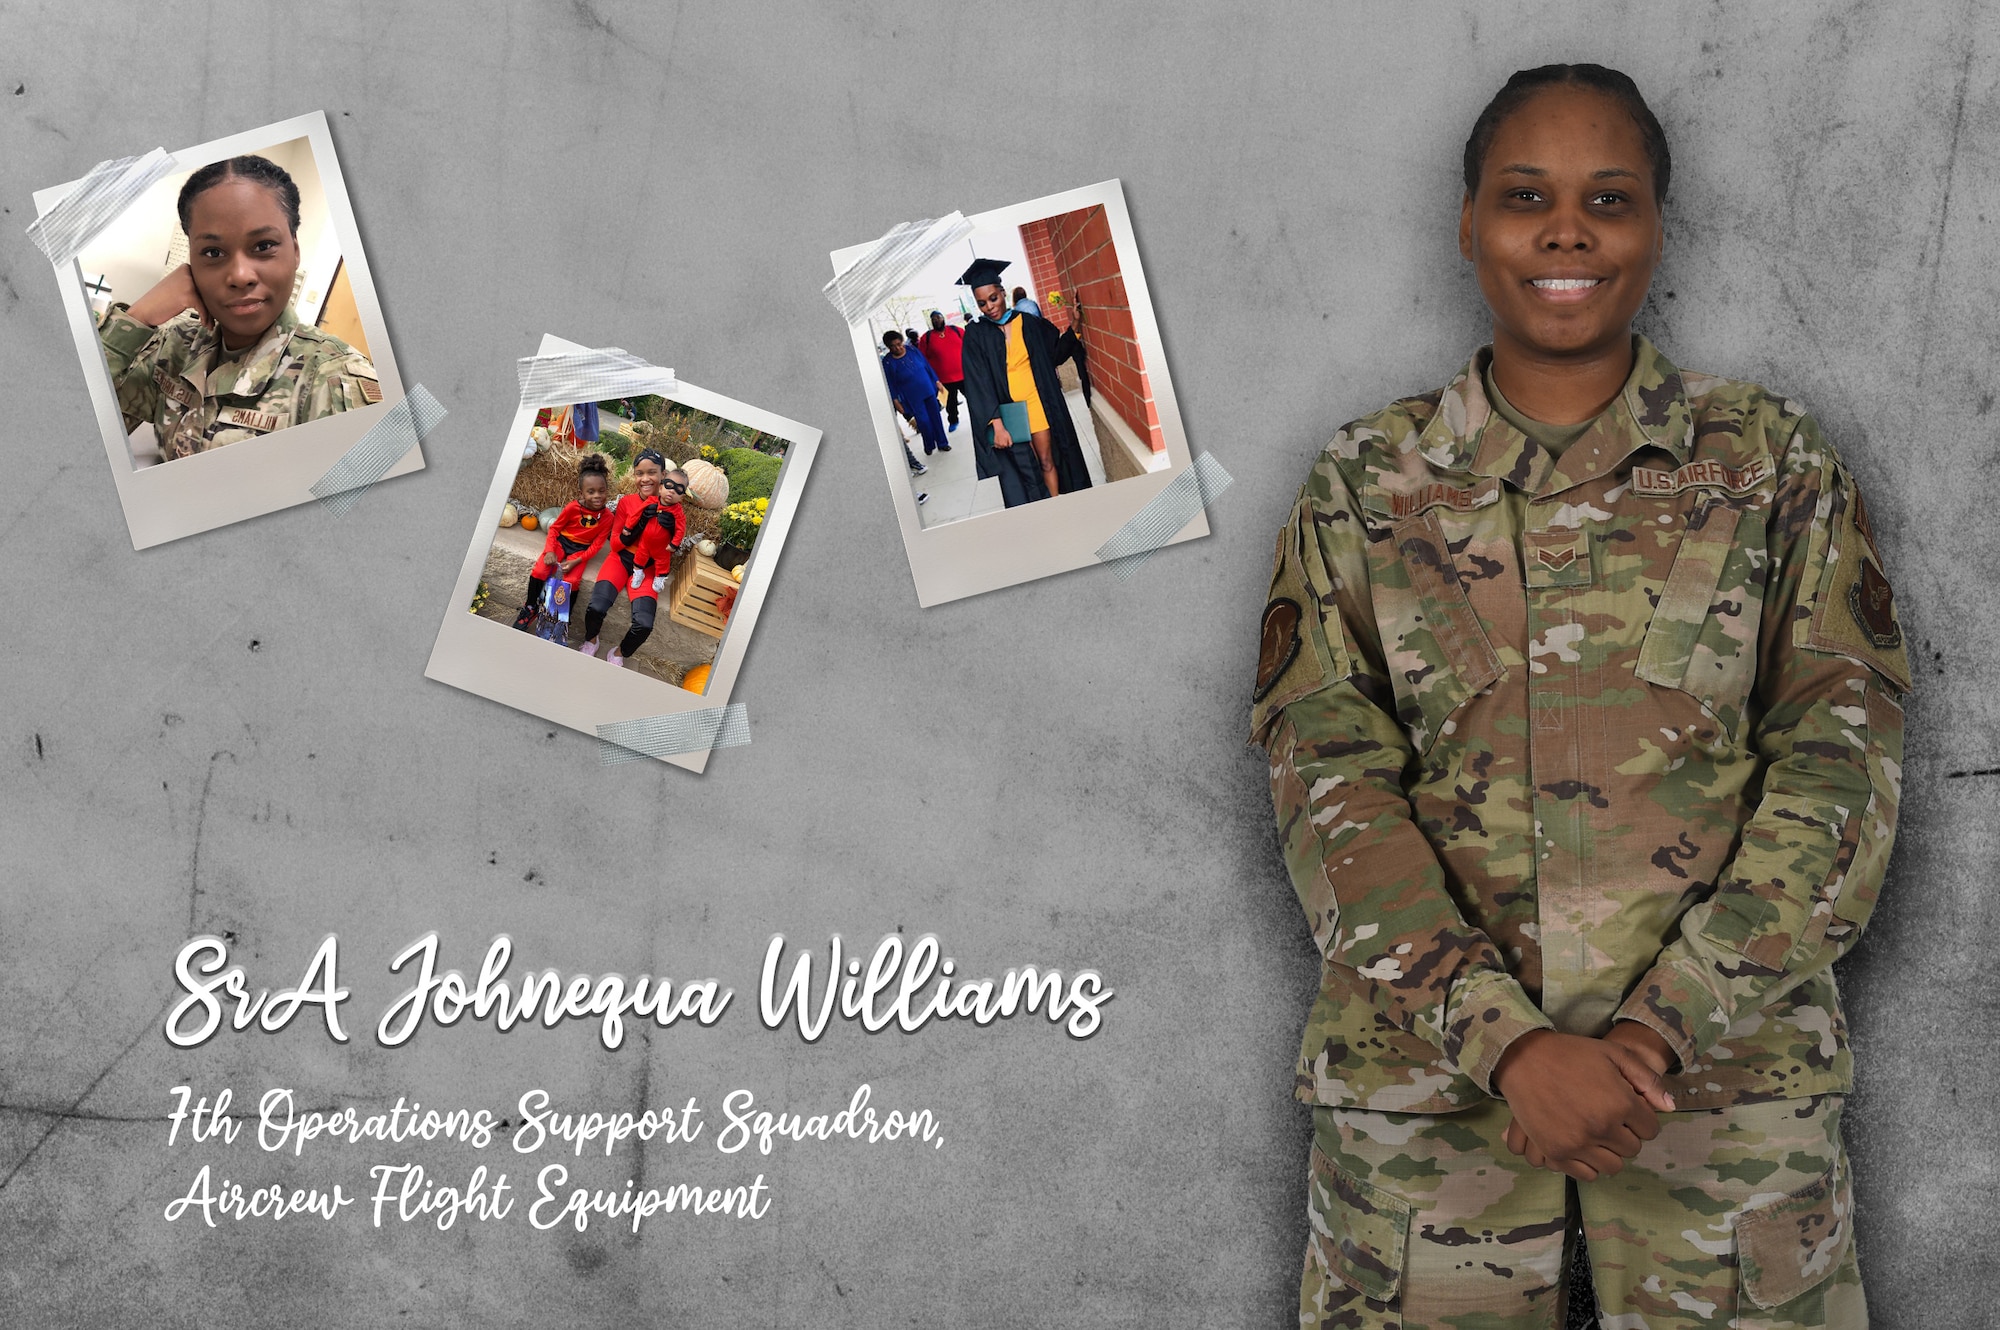 This Women's History Month, we celebrate the resilience and determination of women who overcome challenging circumstances to achieve their goals. One such woman is Senior Airman Johnequa Williams, who grew up in a two bedroom house with a hard-working single mother and three siblings. Despite facing financial challenges, she found joy in participating in school sports and activities. (U.S. Air Force graphic by Senior Airman Josiah Brown)